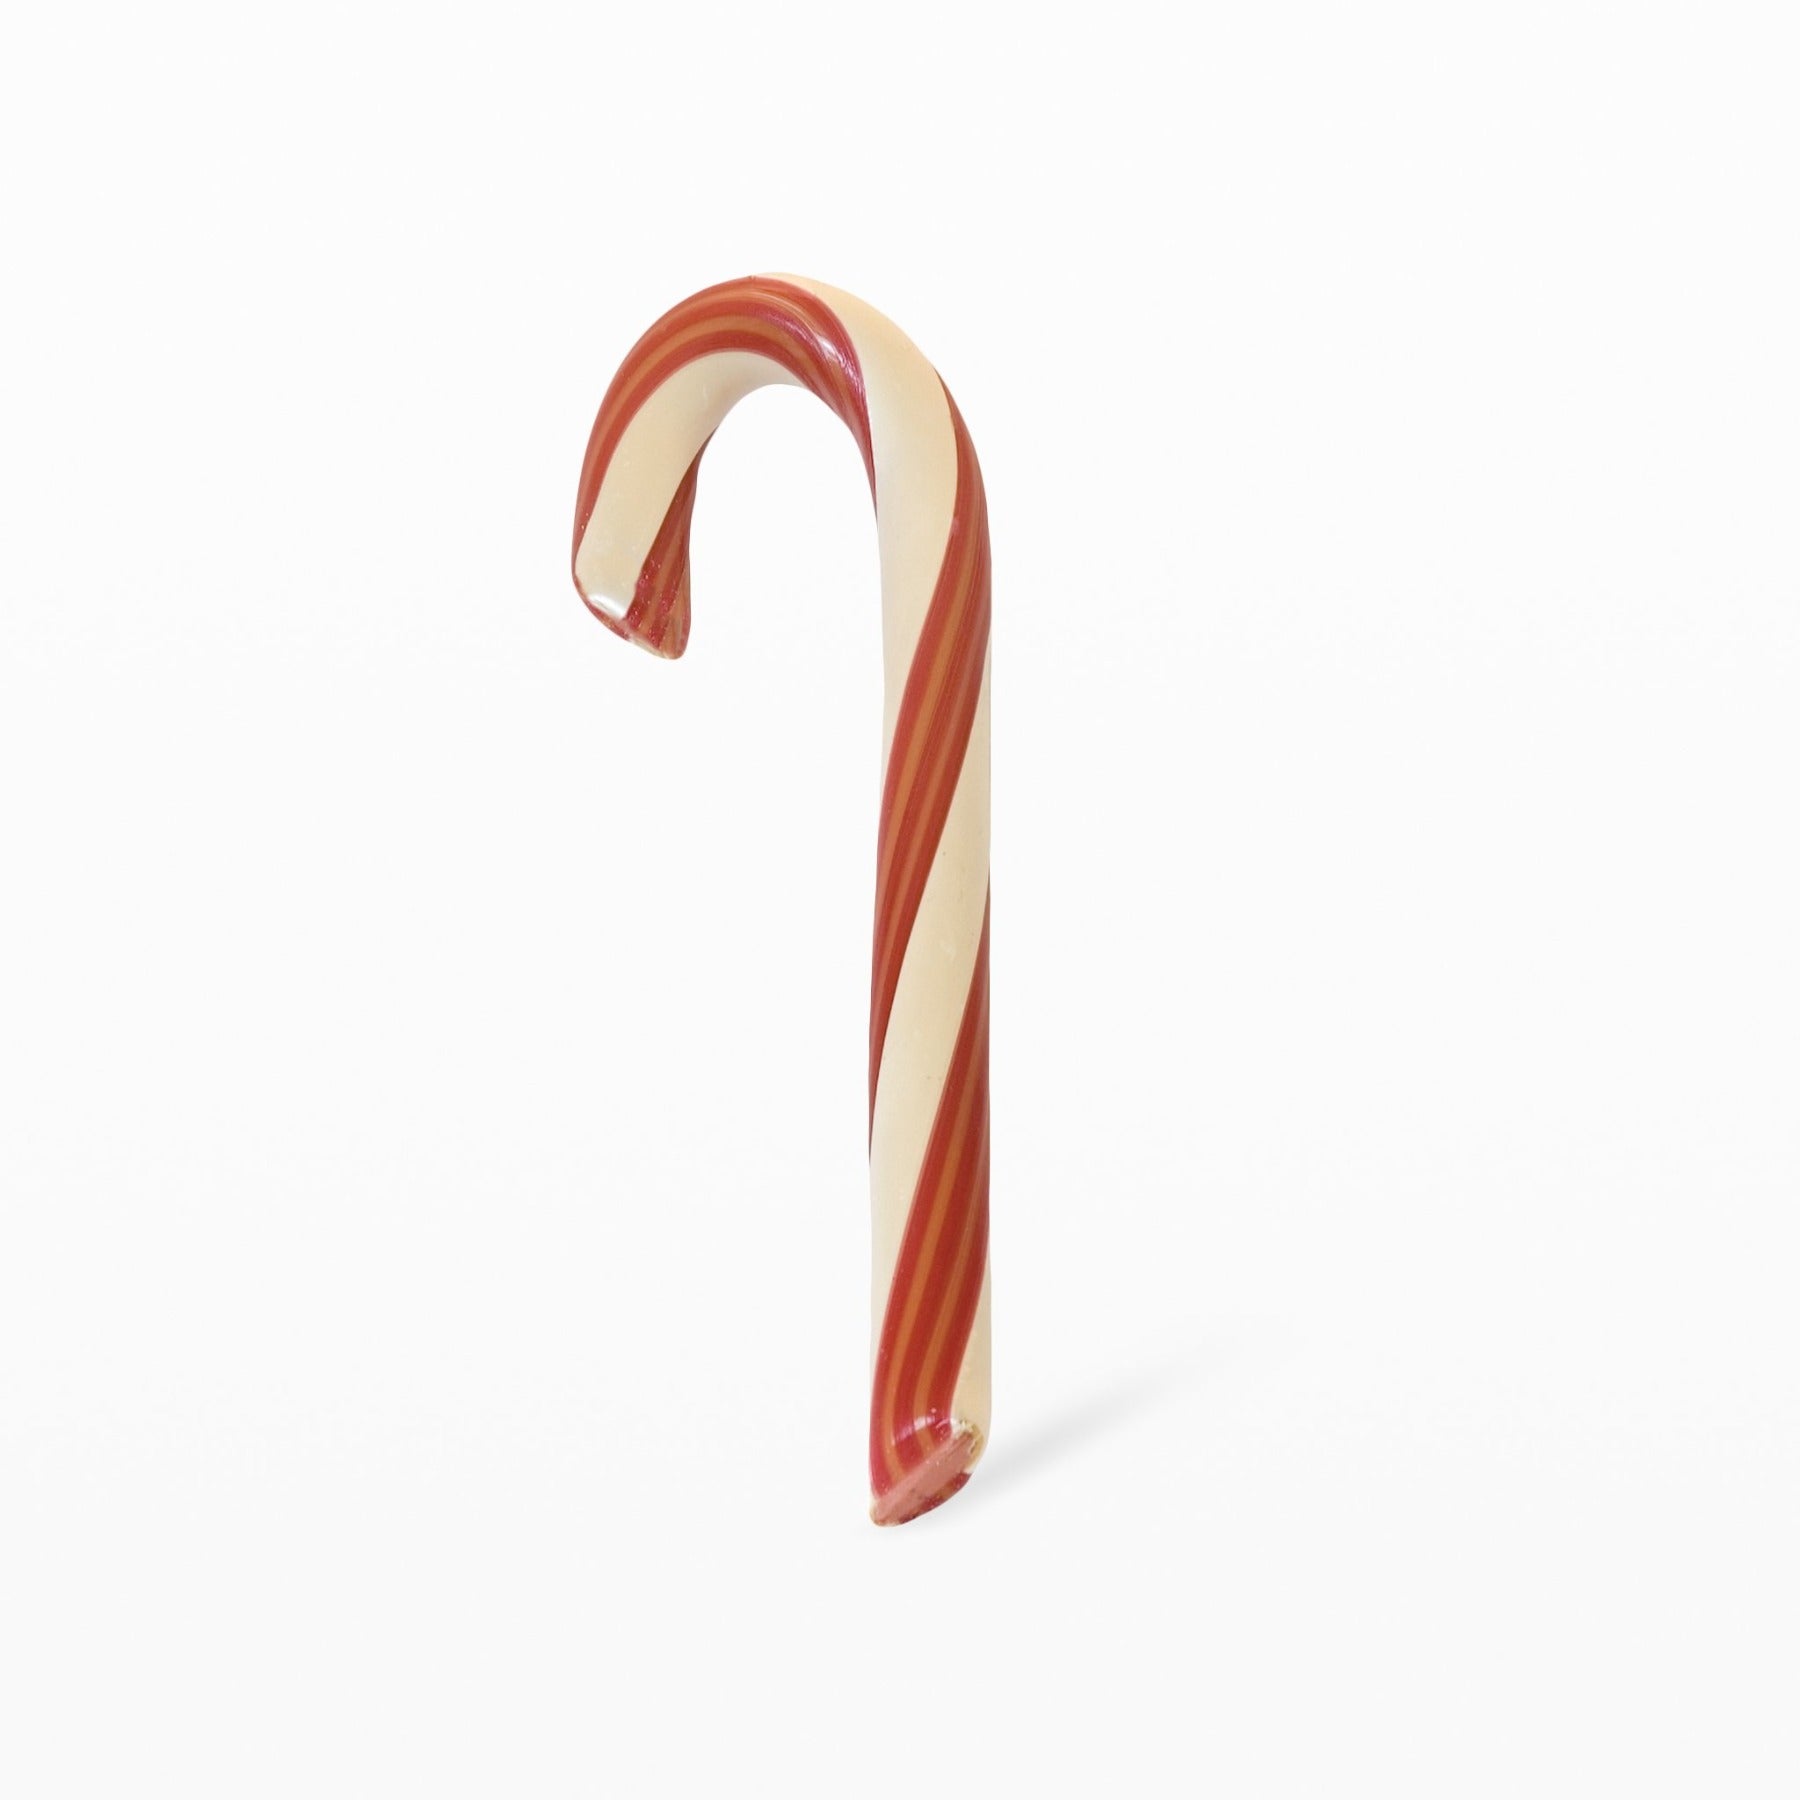 Discover the Sweet Symbolism of the Candy Cane